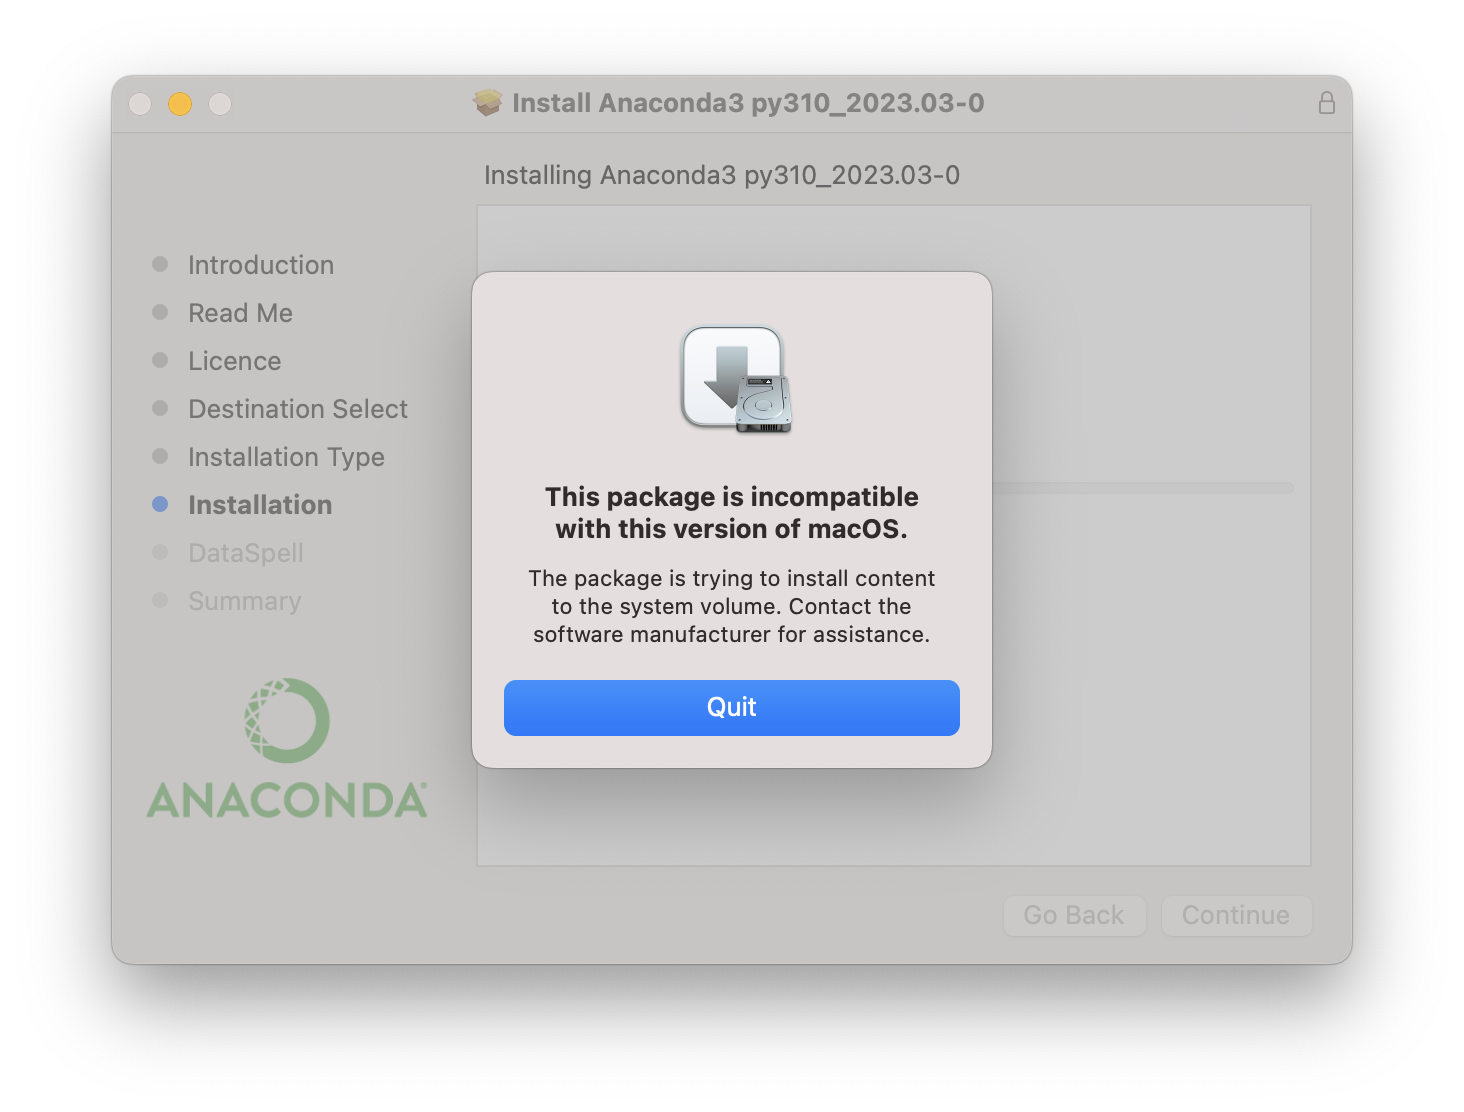 This package is incompatible with this version of macOS